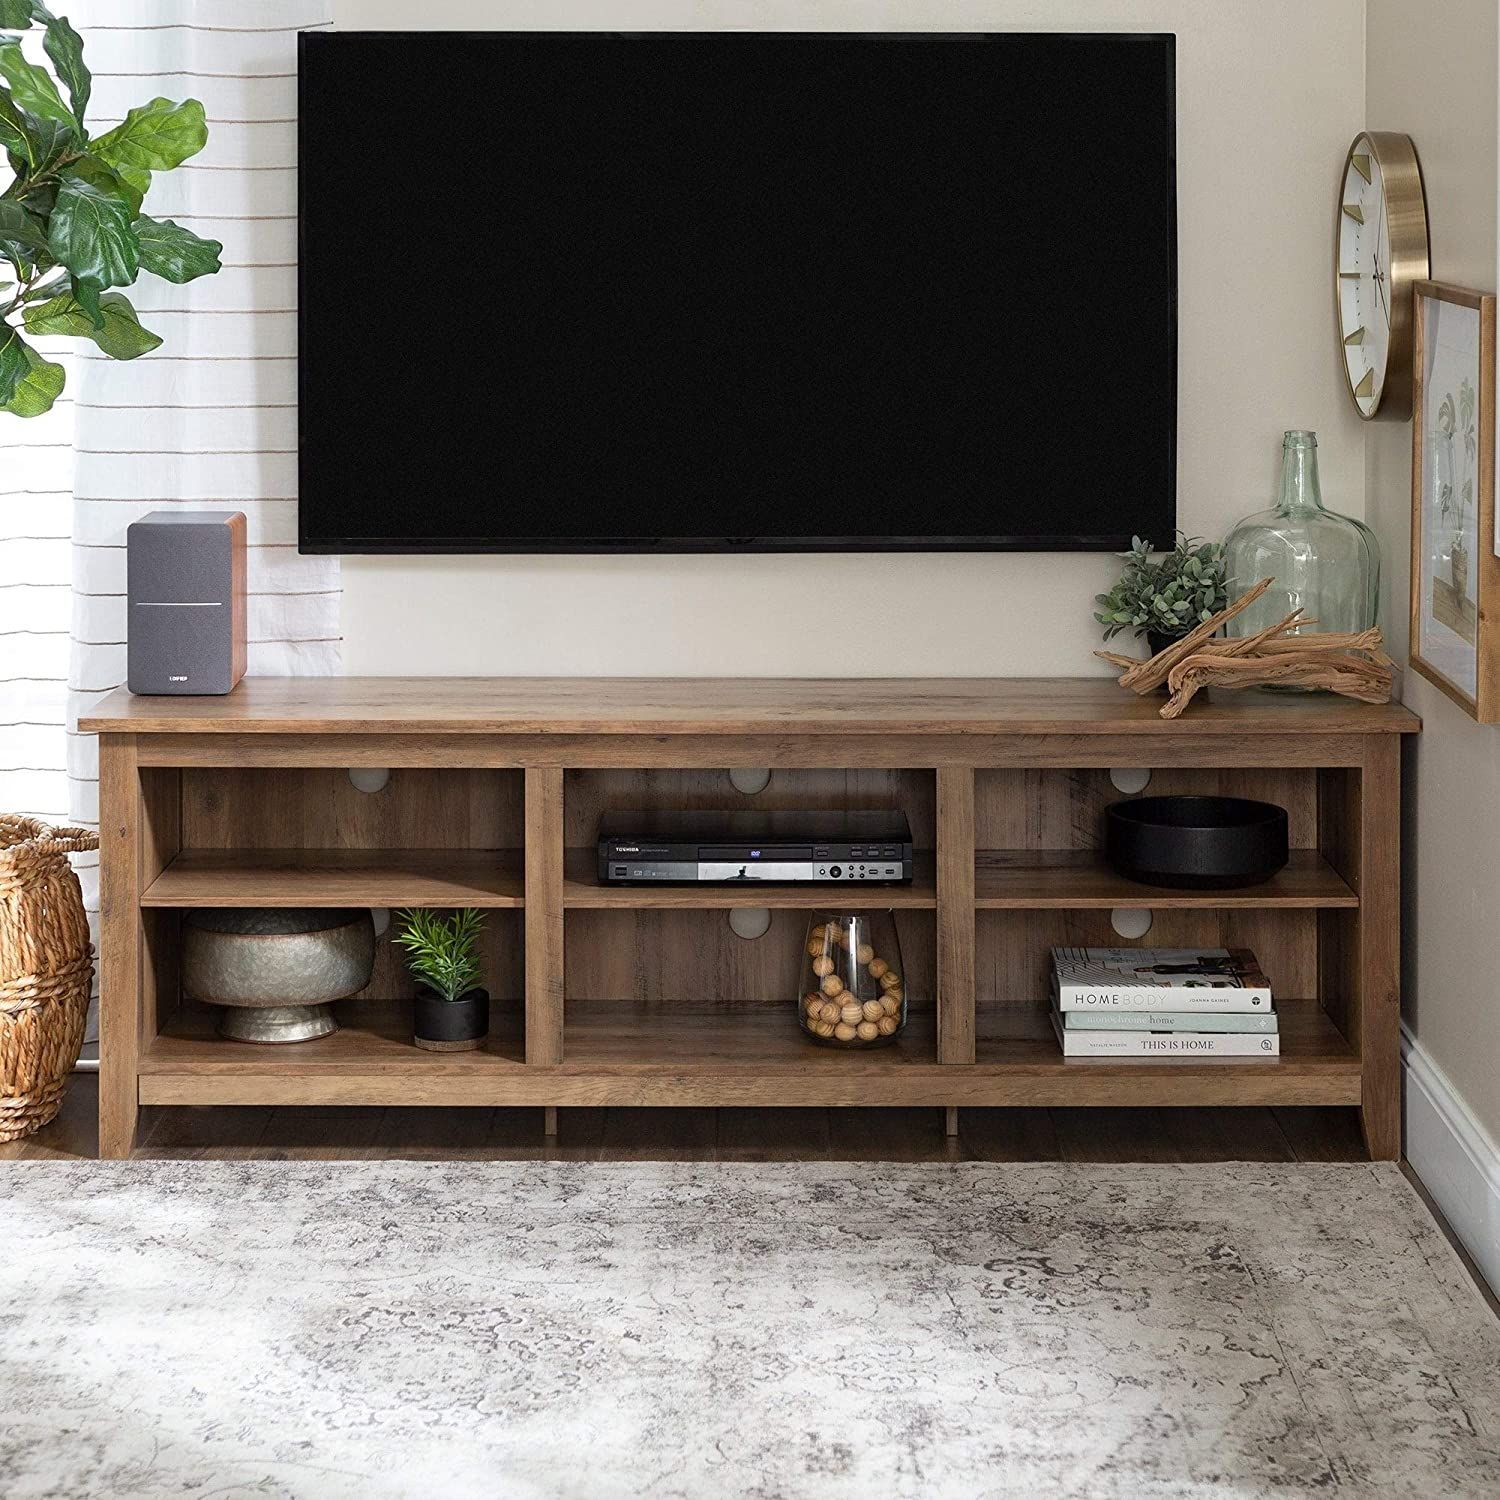 Overstock 70" Tv Stand Console – 70 X 16 X 24h Rustic Oak For Rustic Grey Tv Stand Media Console Stands For Living Room Bedroom (View 6 of 15)